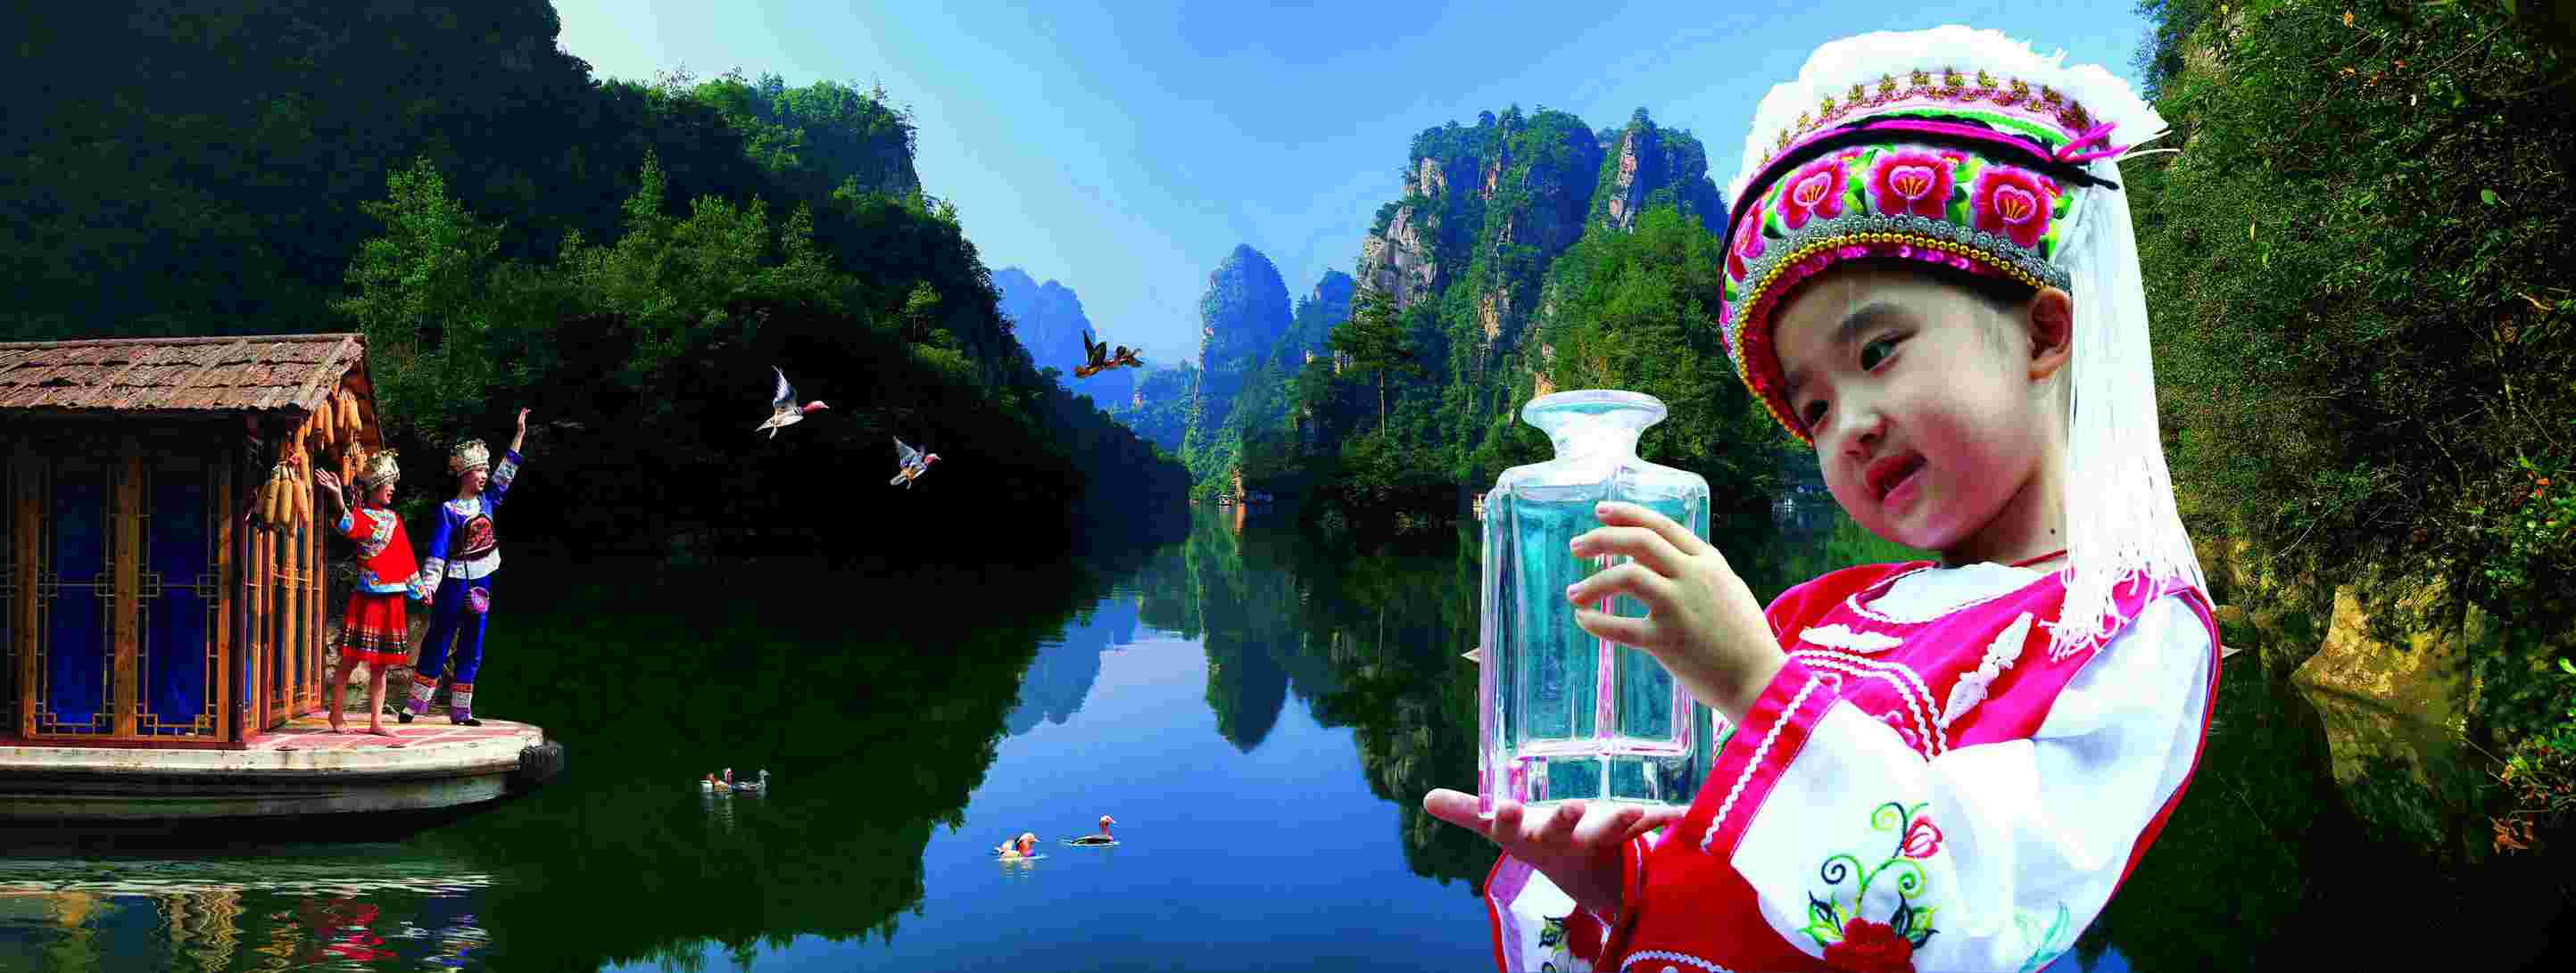 Zhangjiajie Tour-Breathe Deeply in the World Natural Heritage